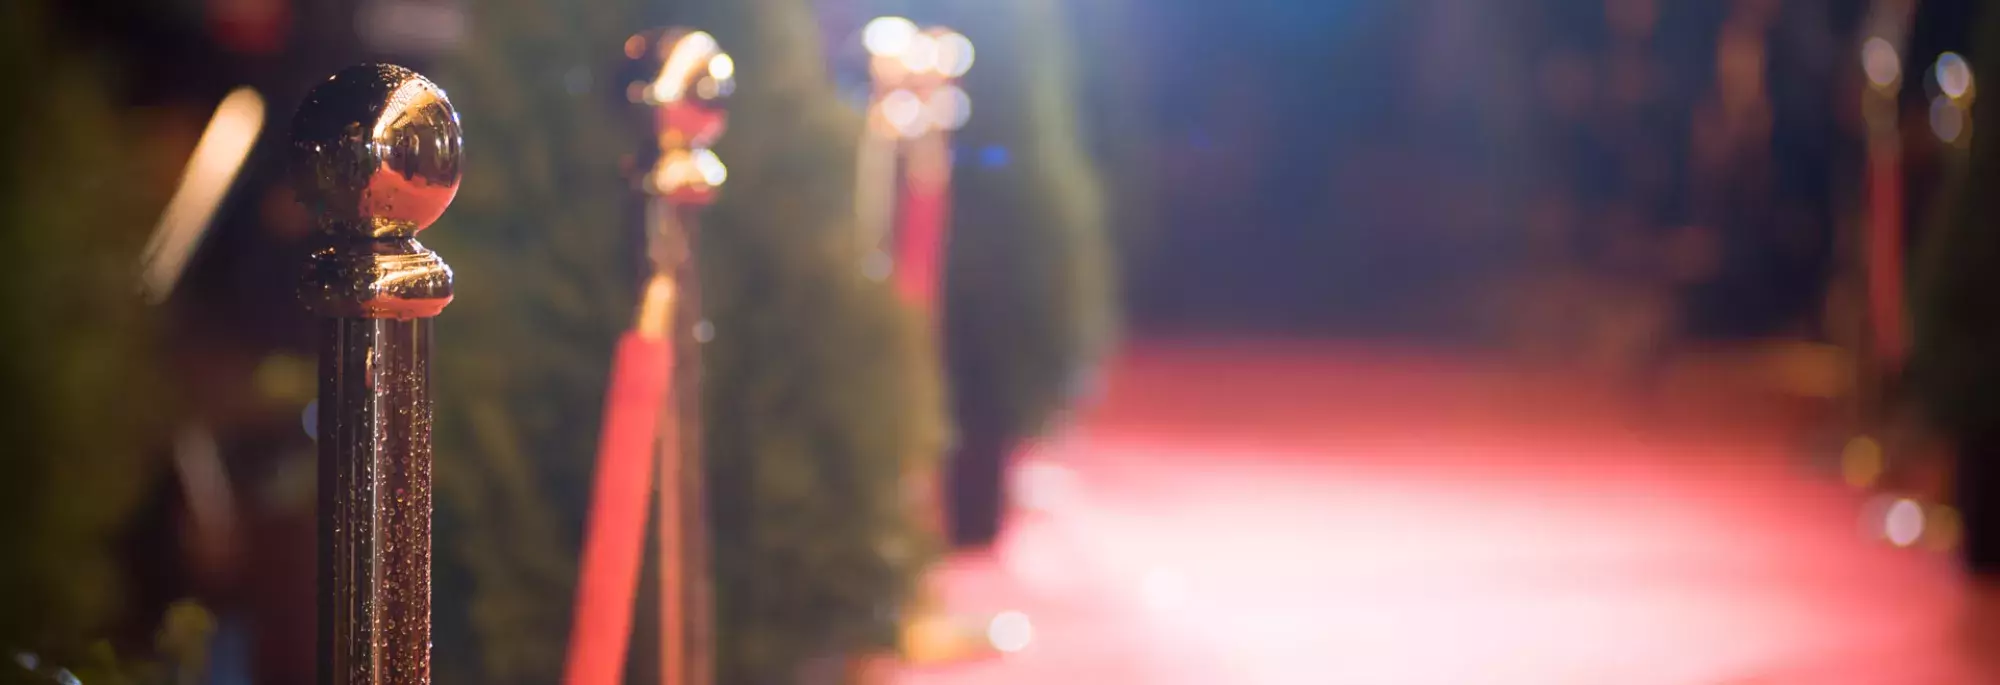 Twinkling Blurred View of Red Carpet Event